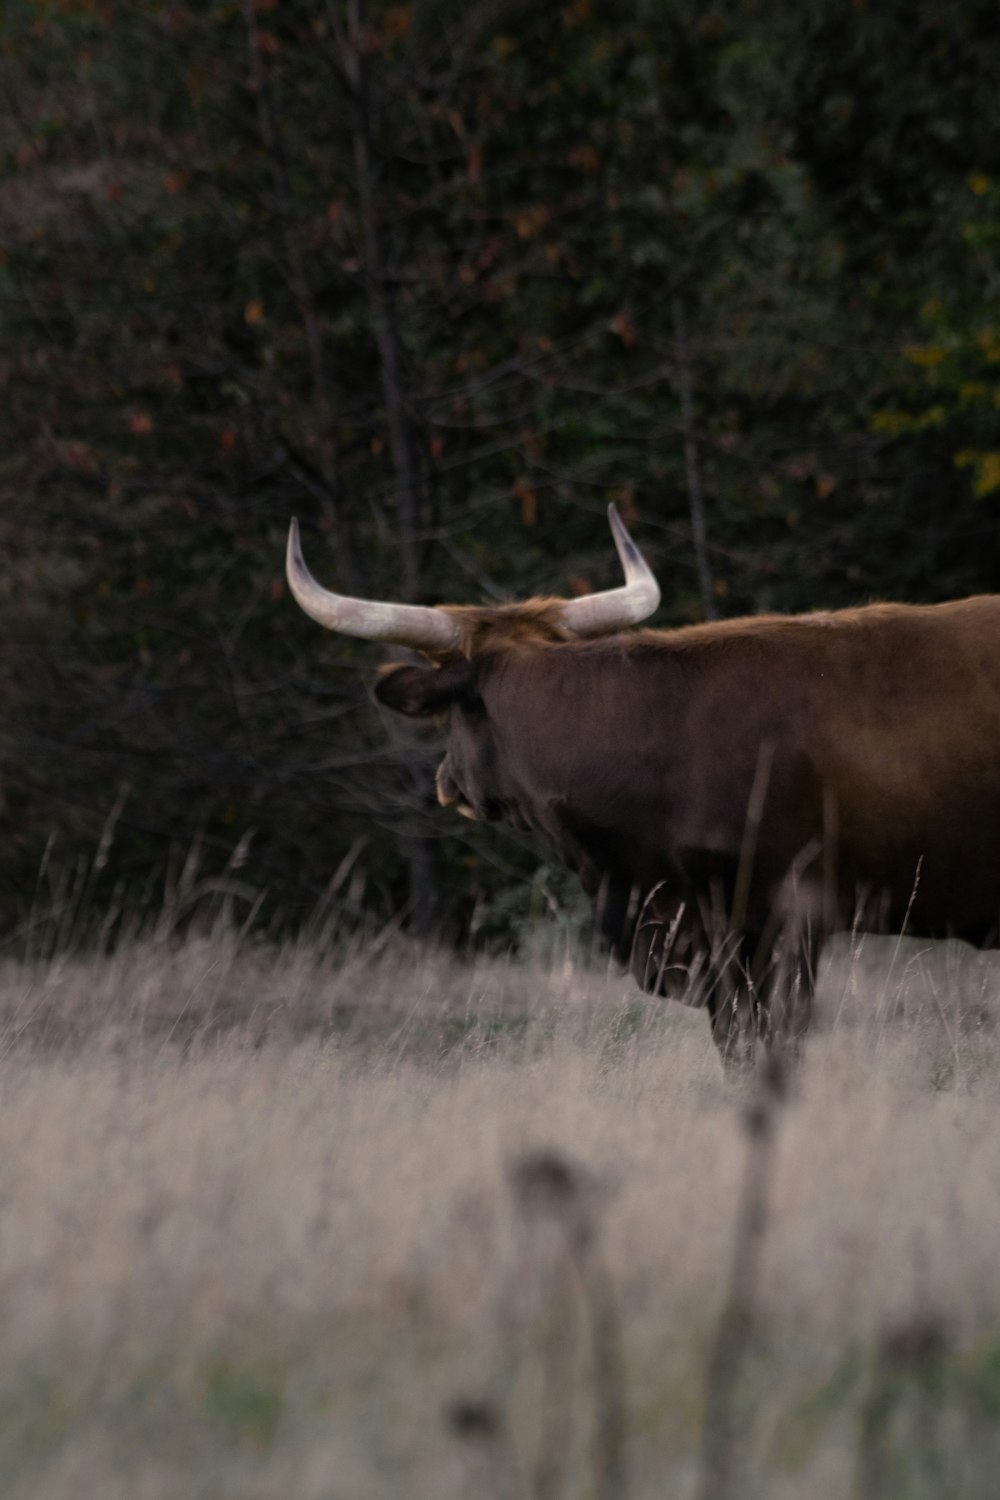 a bull with large horns walking through a field